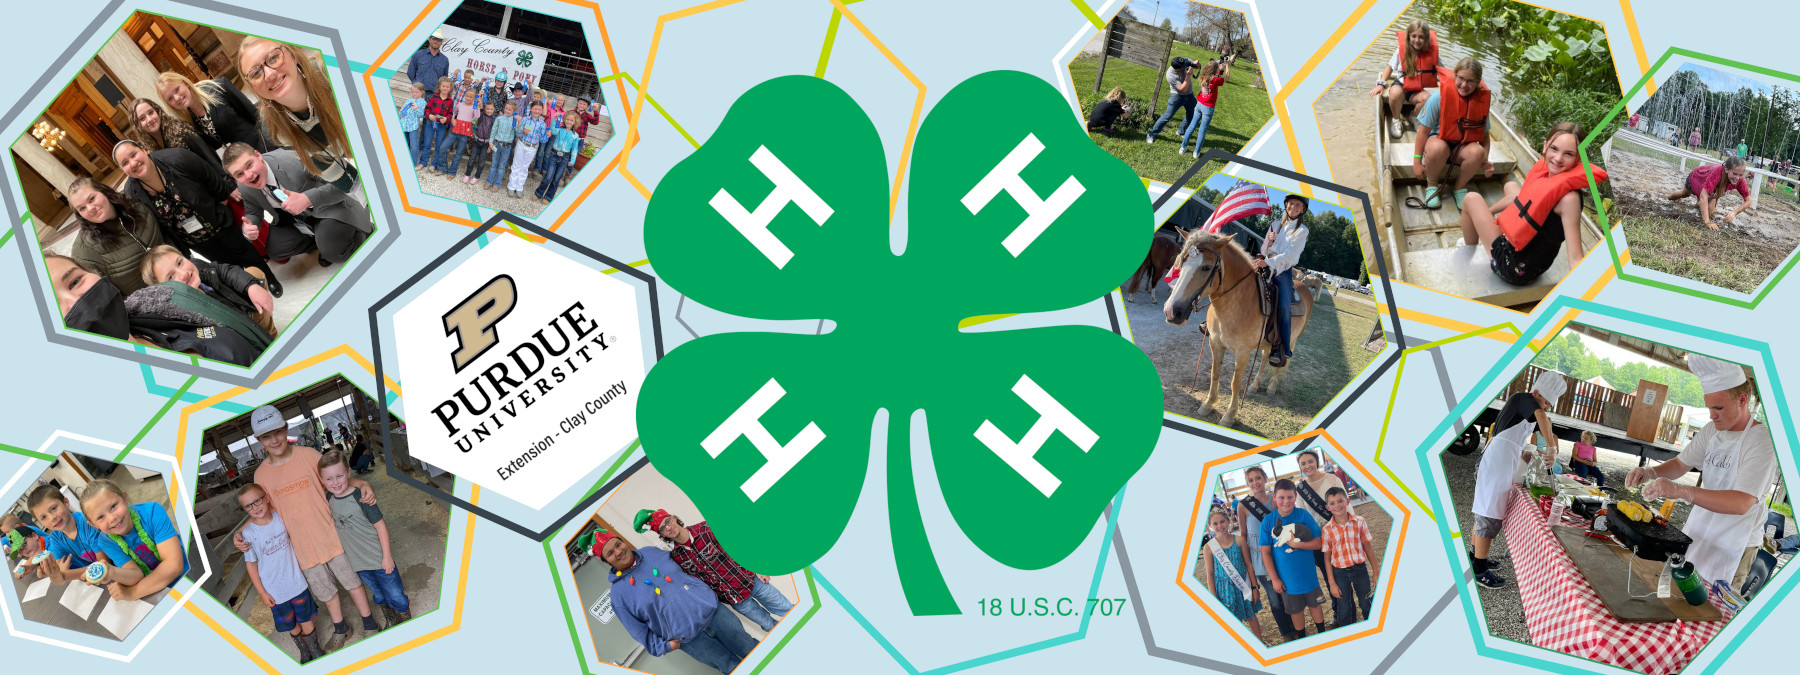 join 4-H